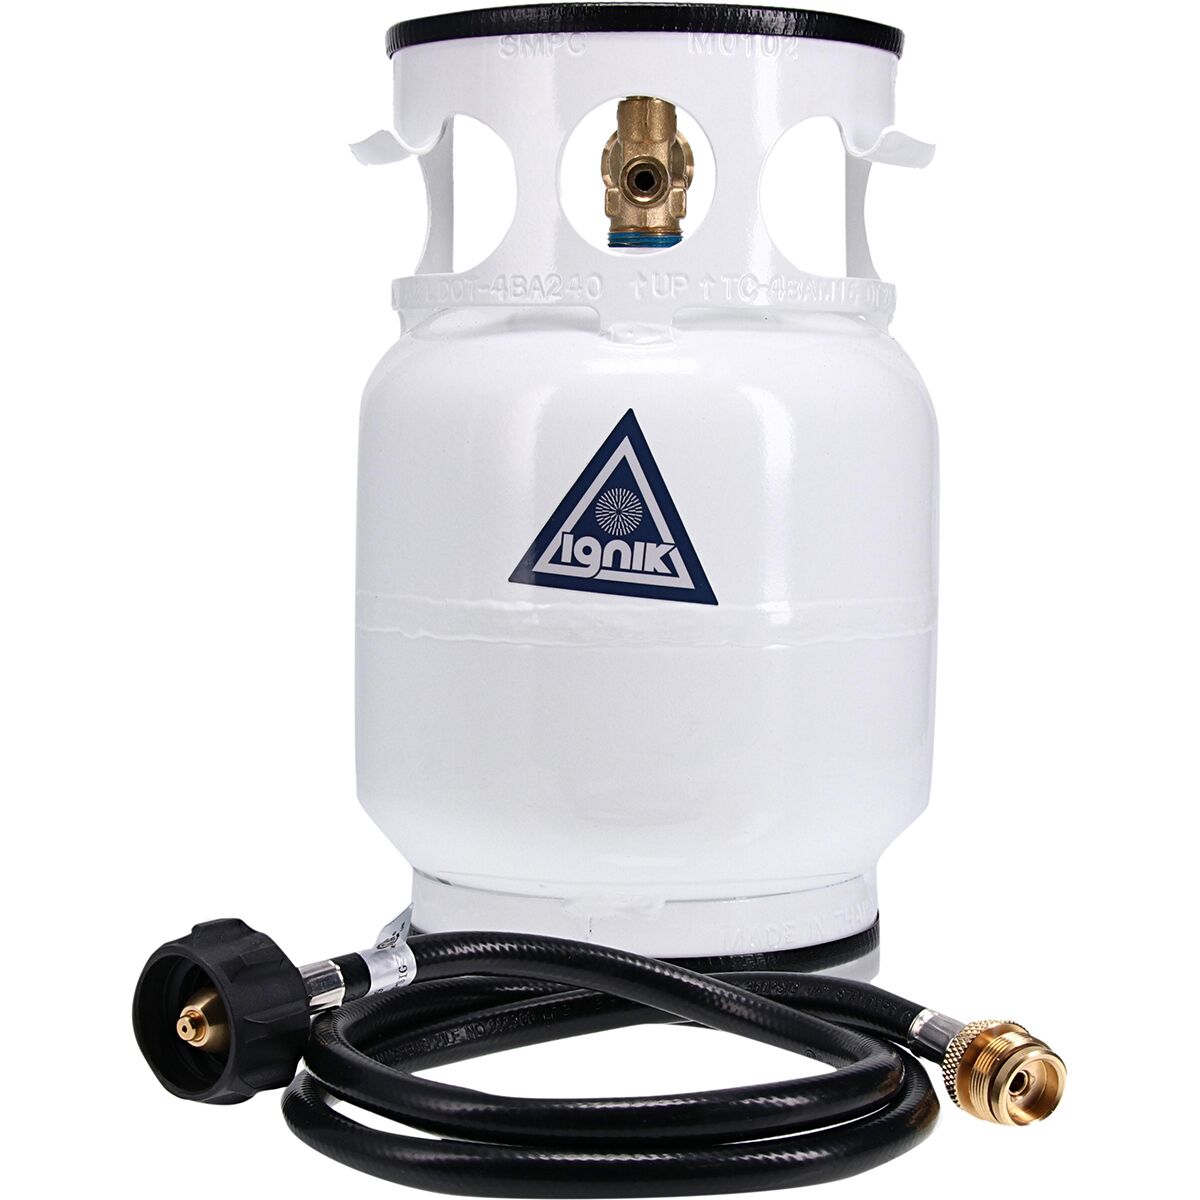 Ignik Outdoors 5-Pound Gas Growler + Adapter Hose